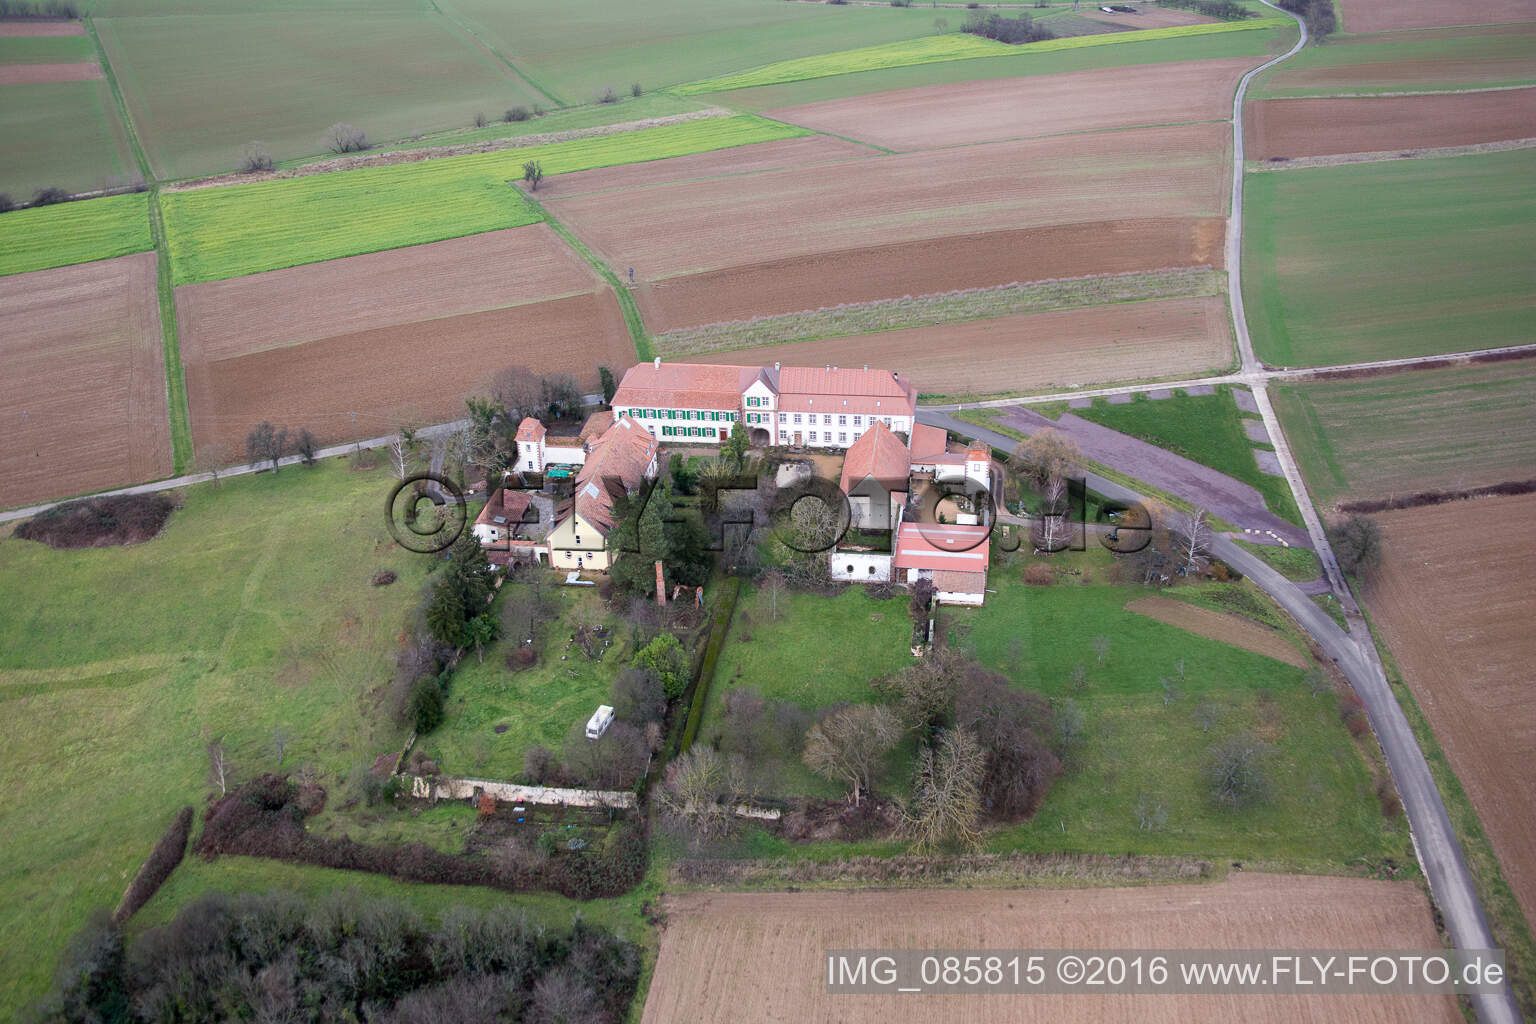 Workshop for Assisted Living of hidden Talents GmbH in the district Haftelhof in Schweighofen in the state Rhineland-Palatinate, Germany from the drone perspective